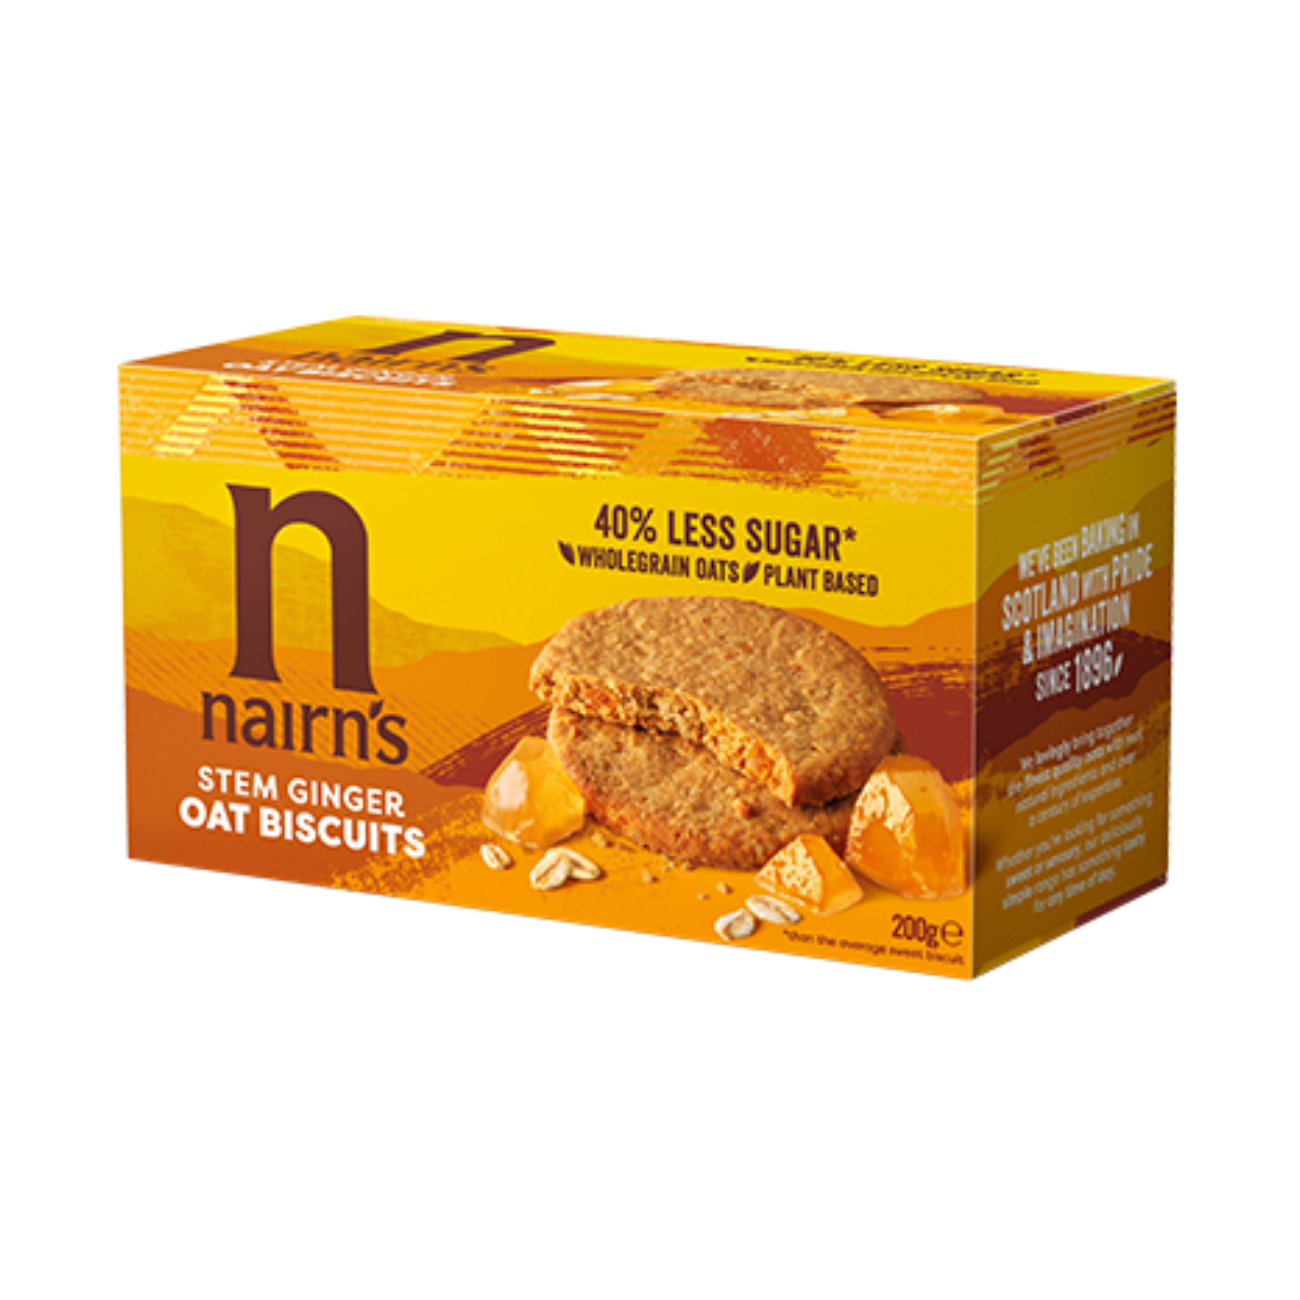 Oats and Stem Ginger Biscuit 200g